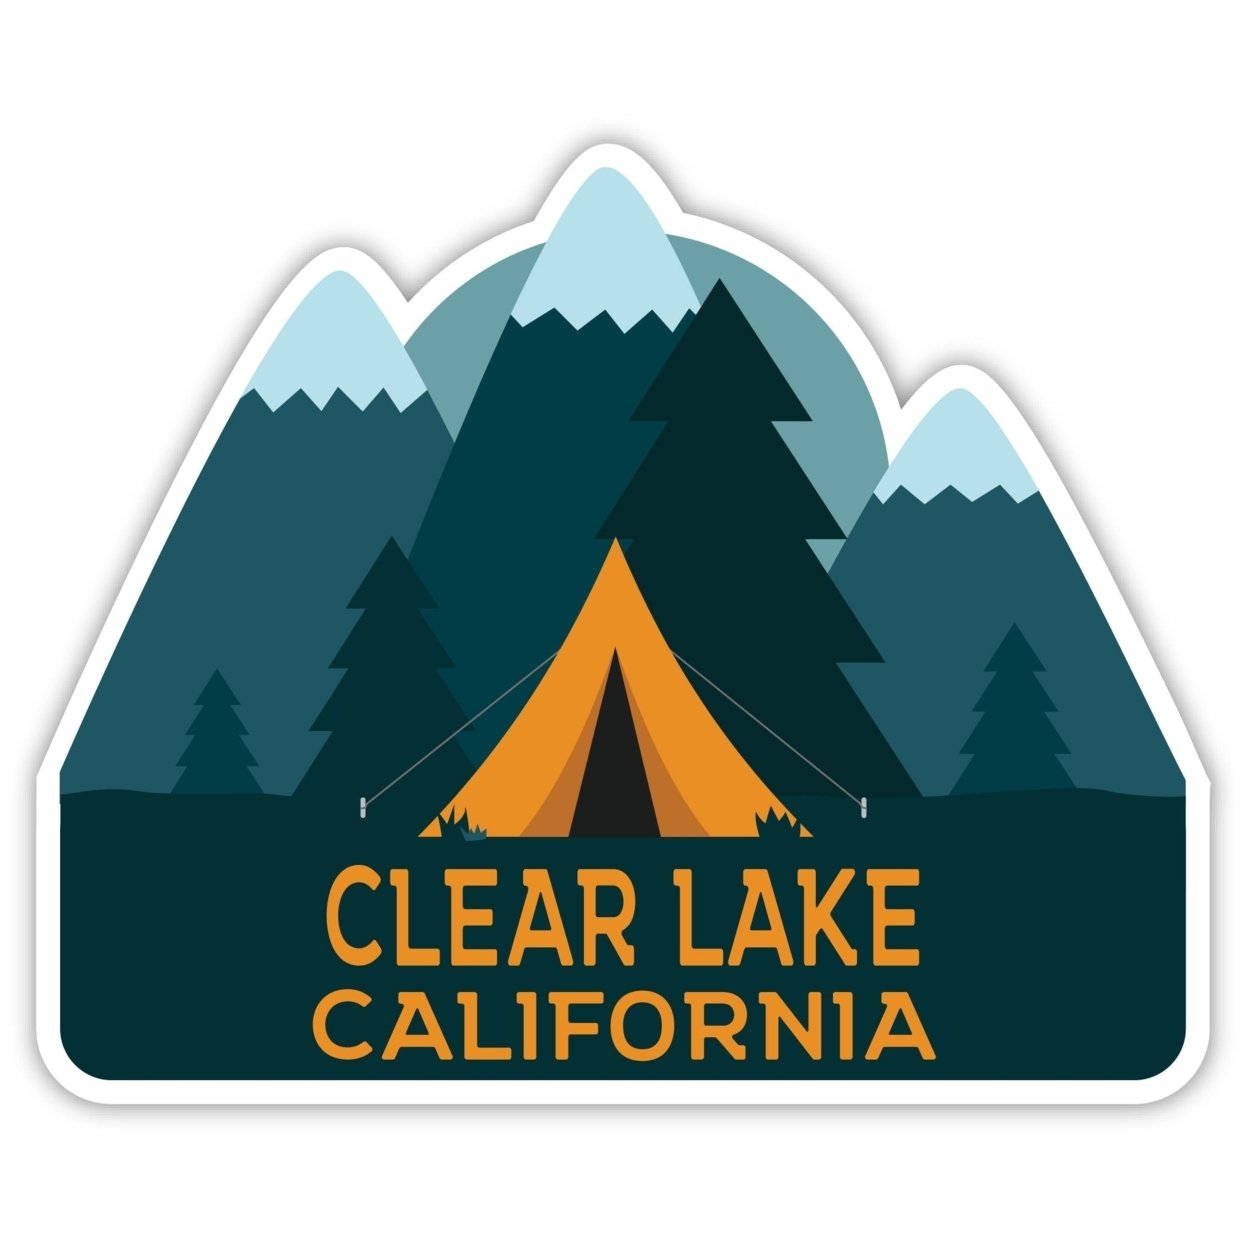 Clear Lake California Souvenir Decorative Stickers (Choose Theme And Size) - 4-Pack, 2-Inch, Tent